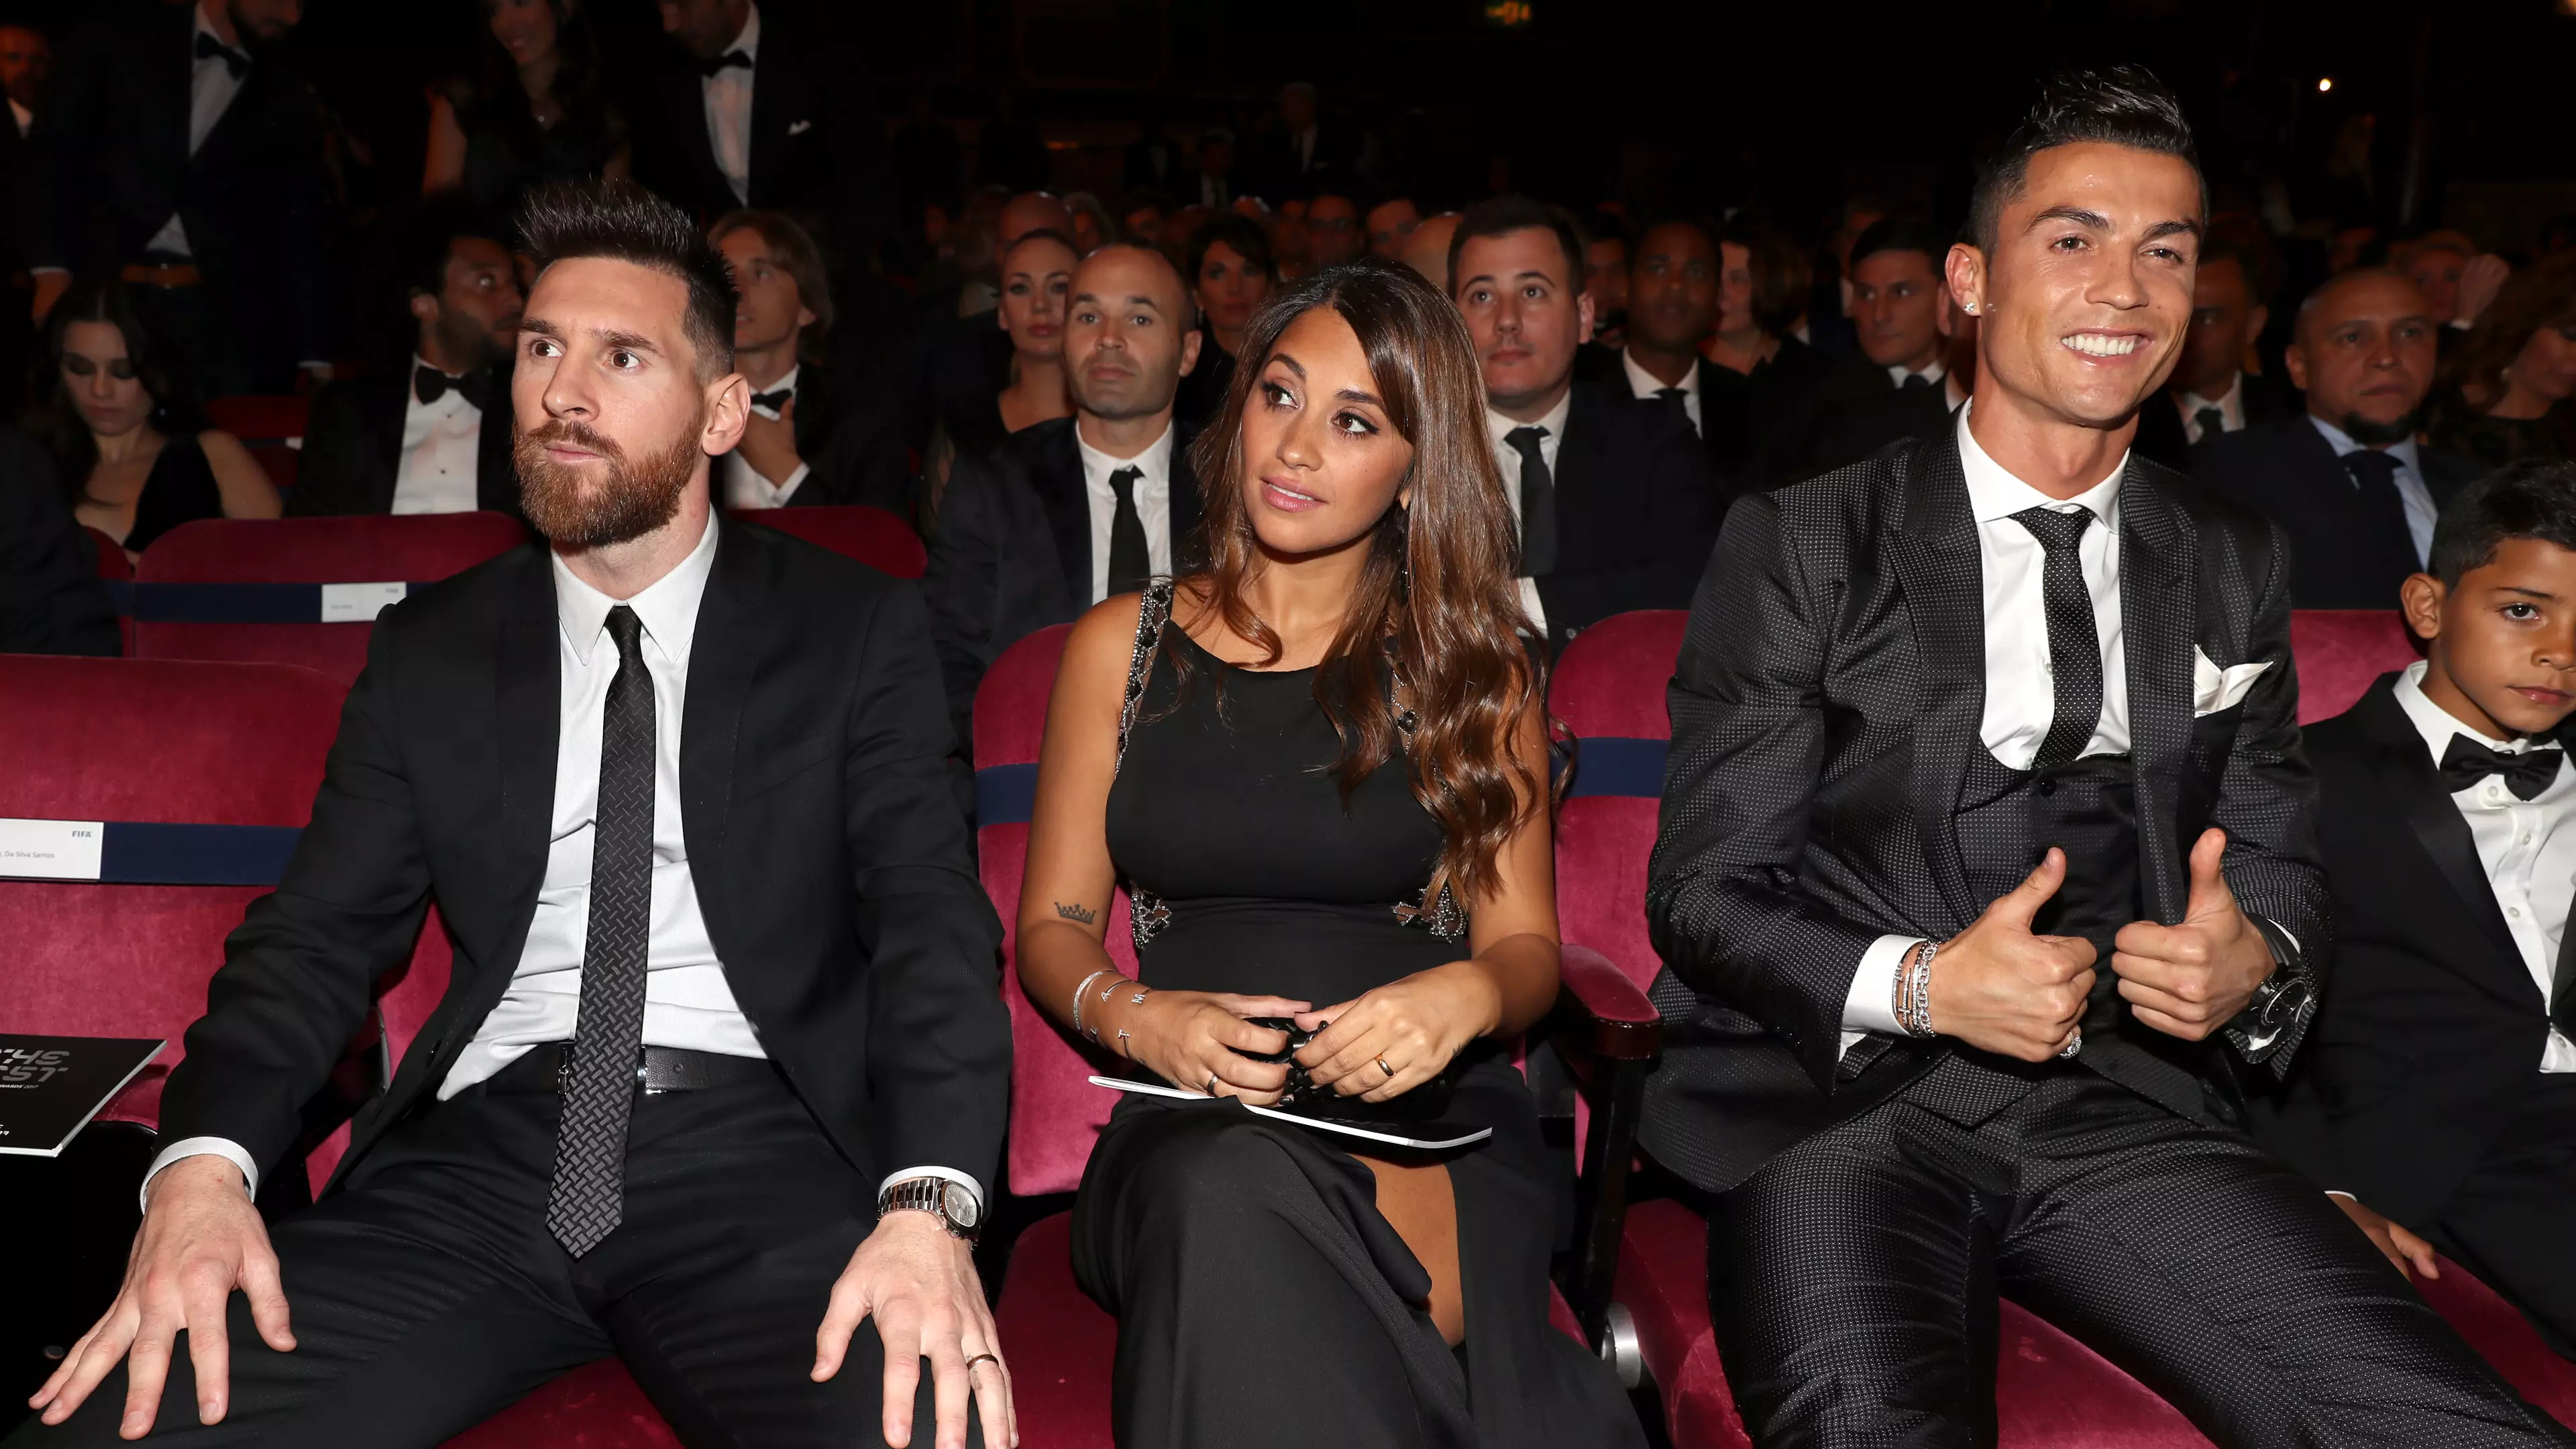 Cristiano Ronaldo Says Messi Made Him A Better Player, Open To Having Dinner Together